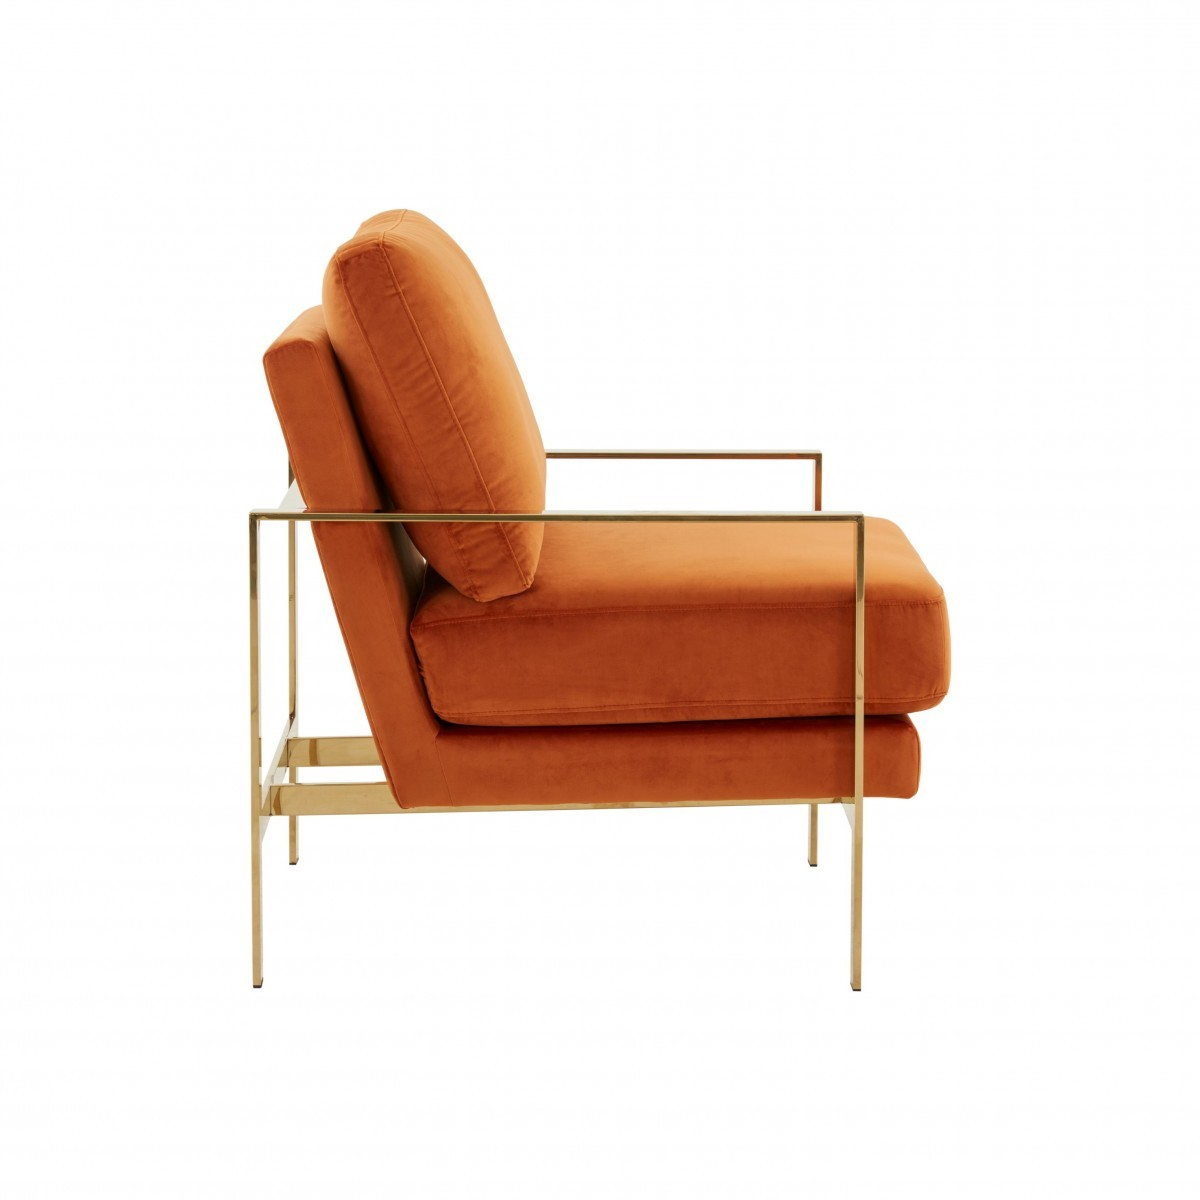 Orange And Gold Opulent Oasis Accent Chair